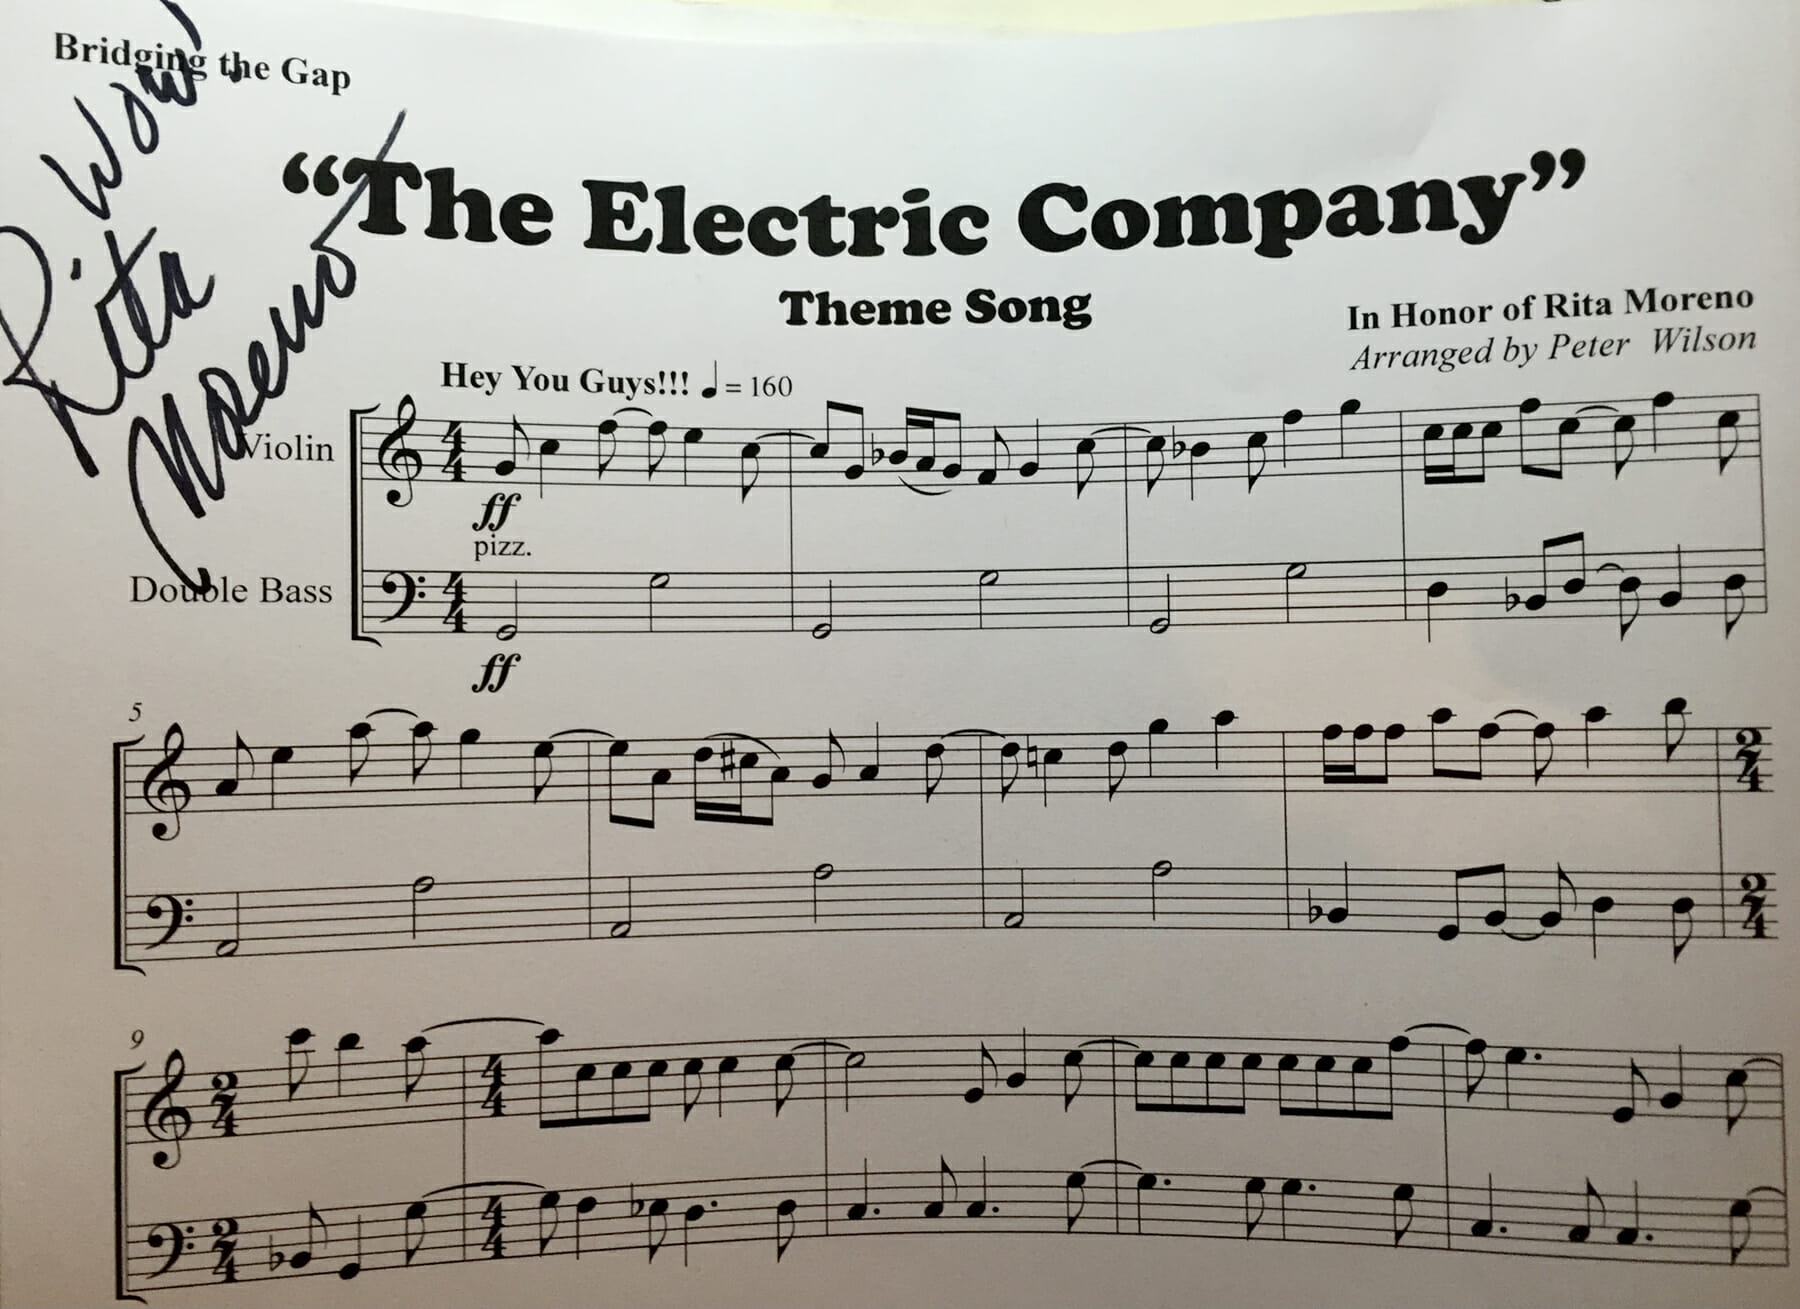 Sheet music signed by Kennedy Center Honoree Rita Morano